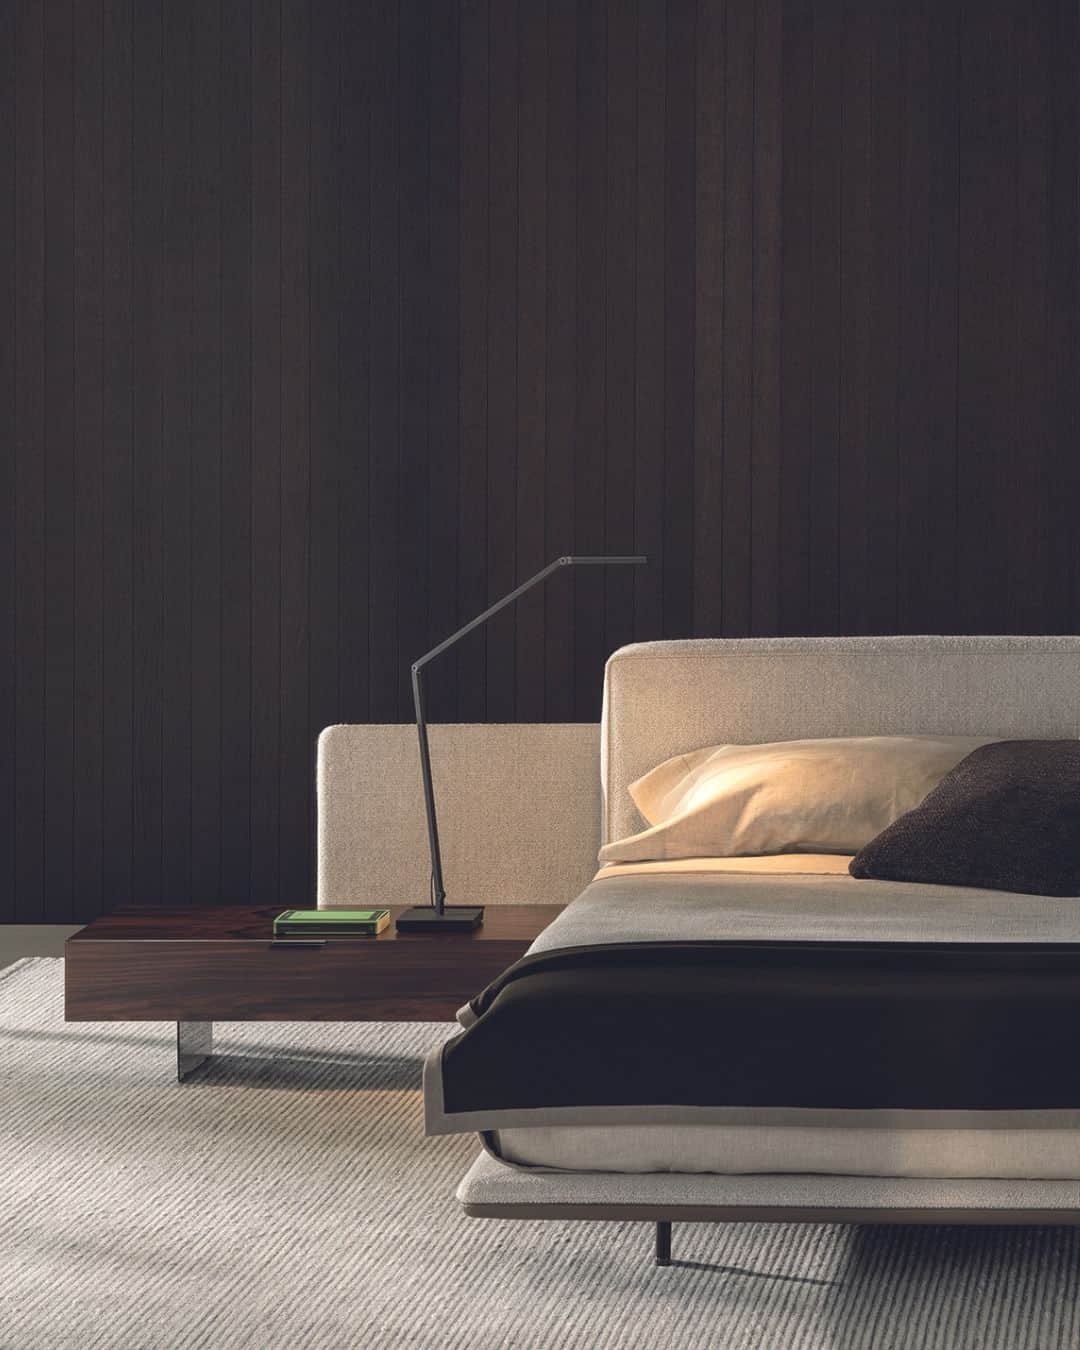 Minotti Londonのインスタグラム：「Horizonte Bed is the natural evolution for the night area of the Horizonte modular seating system.  Designed by @mkogan27 / @studiomk27, it is characterised by the rigorous and light horizontal line that inspires the design of the entire system.  Tap the link in our bio to discover the Horizonte bed.  #horizonte #minotti #minottilondon #marciokogan #studiomk27 #interiordesign #design #luxuryfurniture #madeinitaly #italianstyle #italianfurniture」